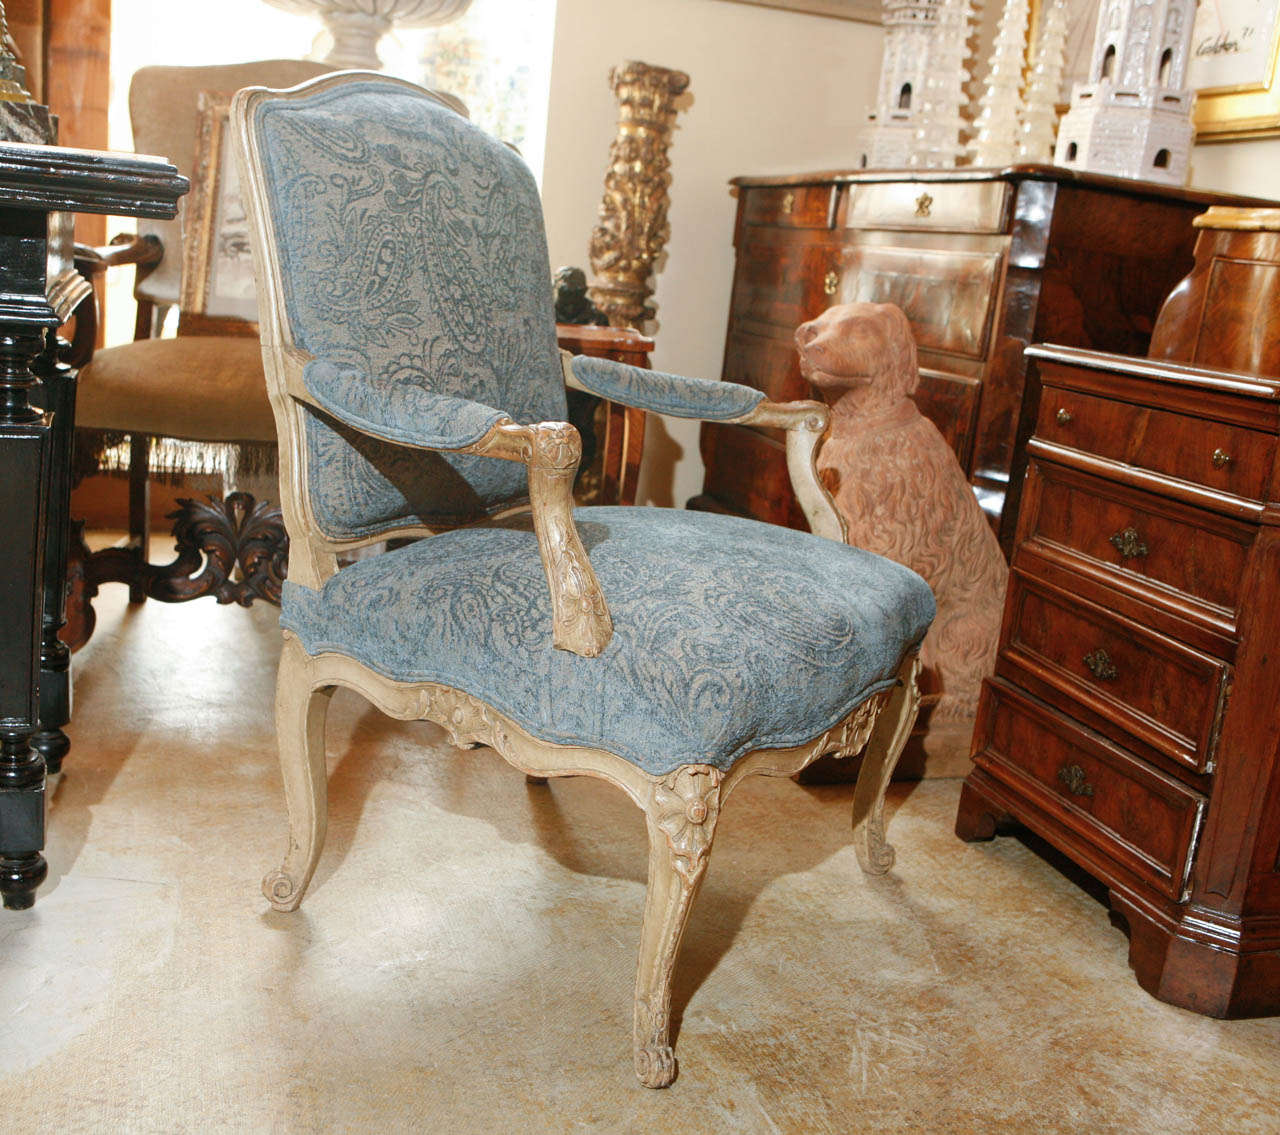 Pair of hand-carved, French fauteuils with scrolling aprons and covered in paisley, indigo, velvet fabric.